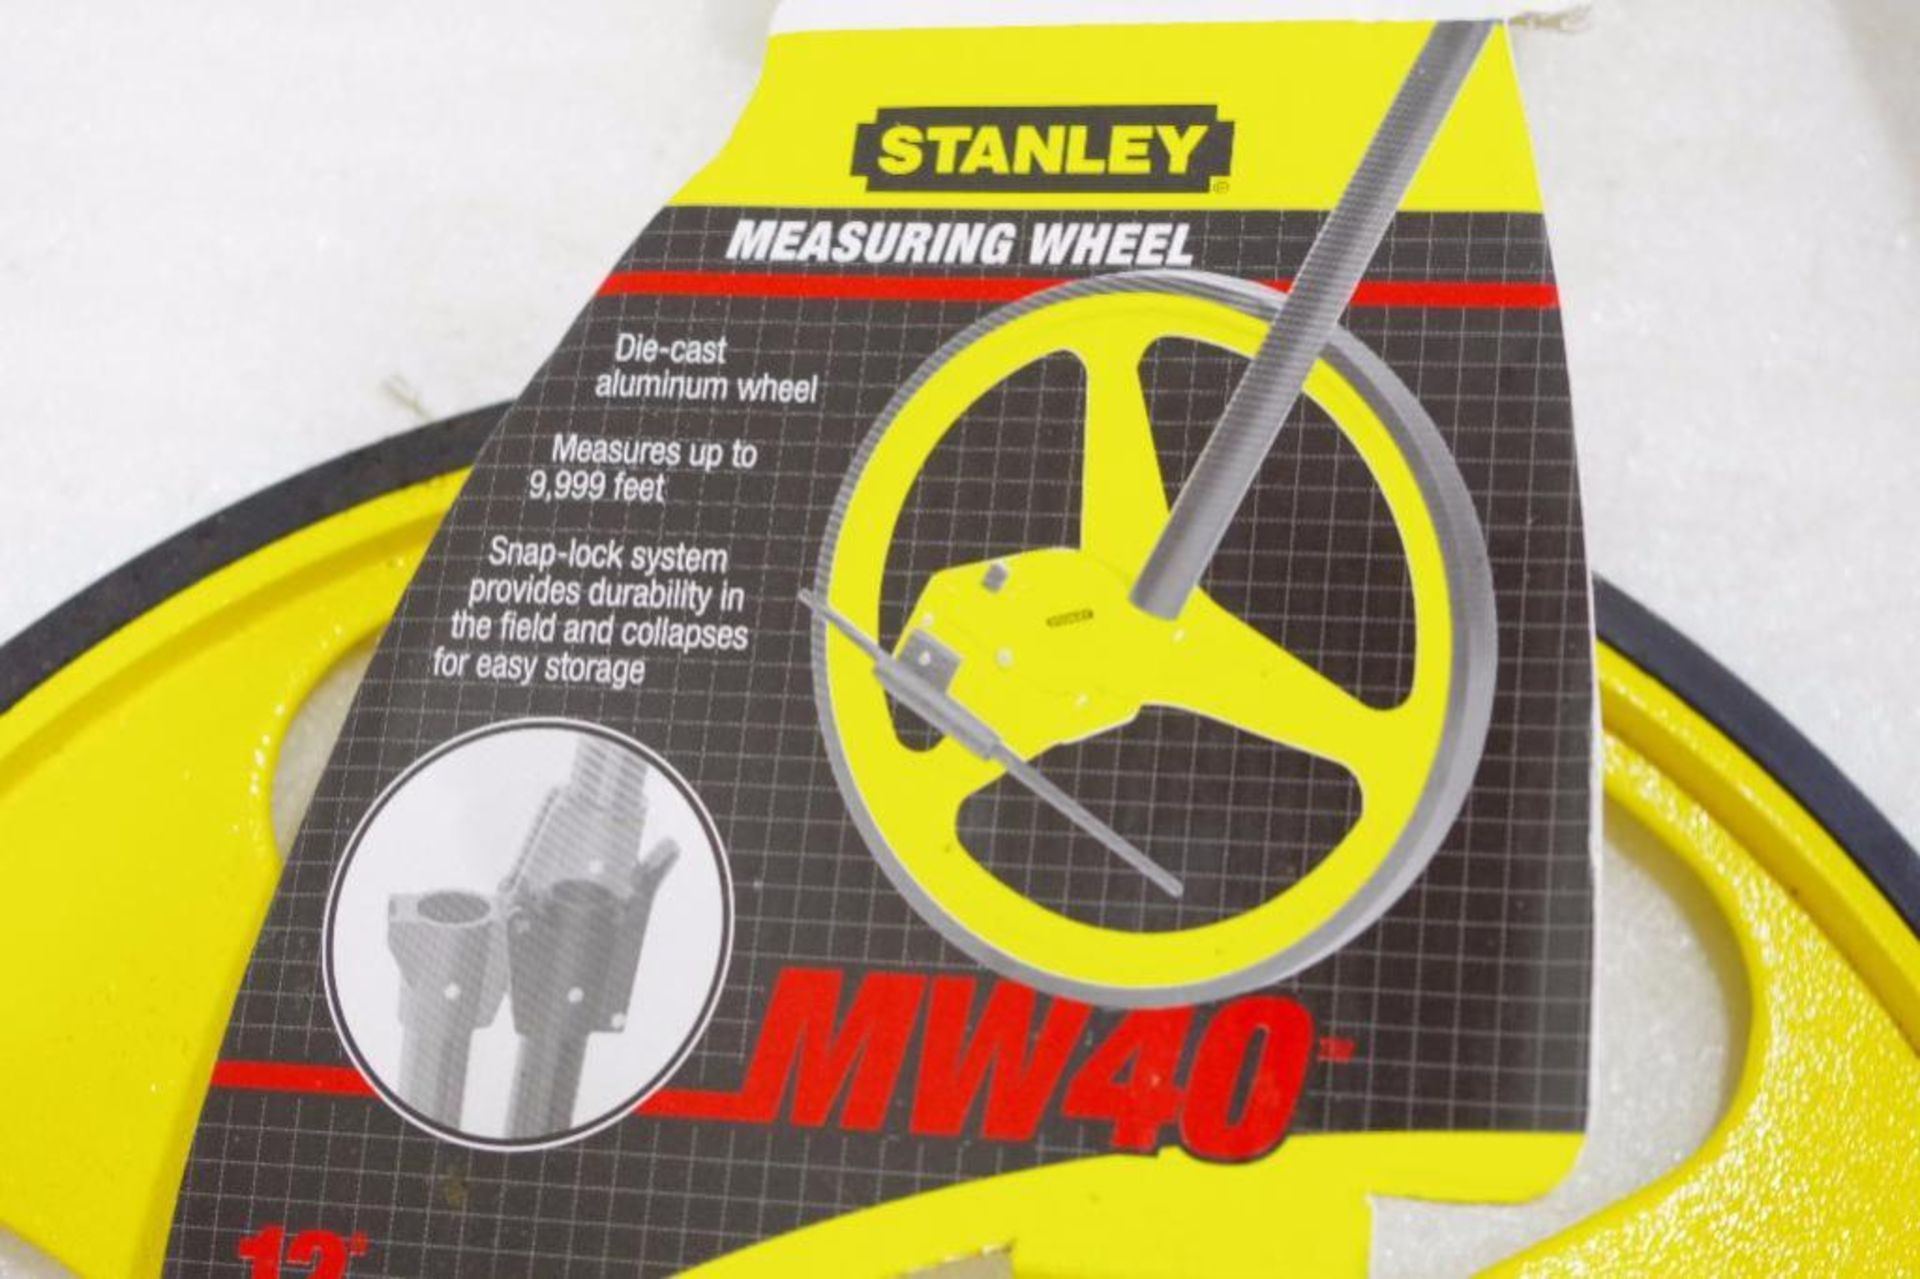 (2) NEW STANLEY Measuring Tools: Chrome 25' Tape Measure & Measuring Wheel, Measures up to 9,999 Ft. - Image 2 of 4